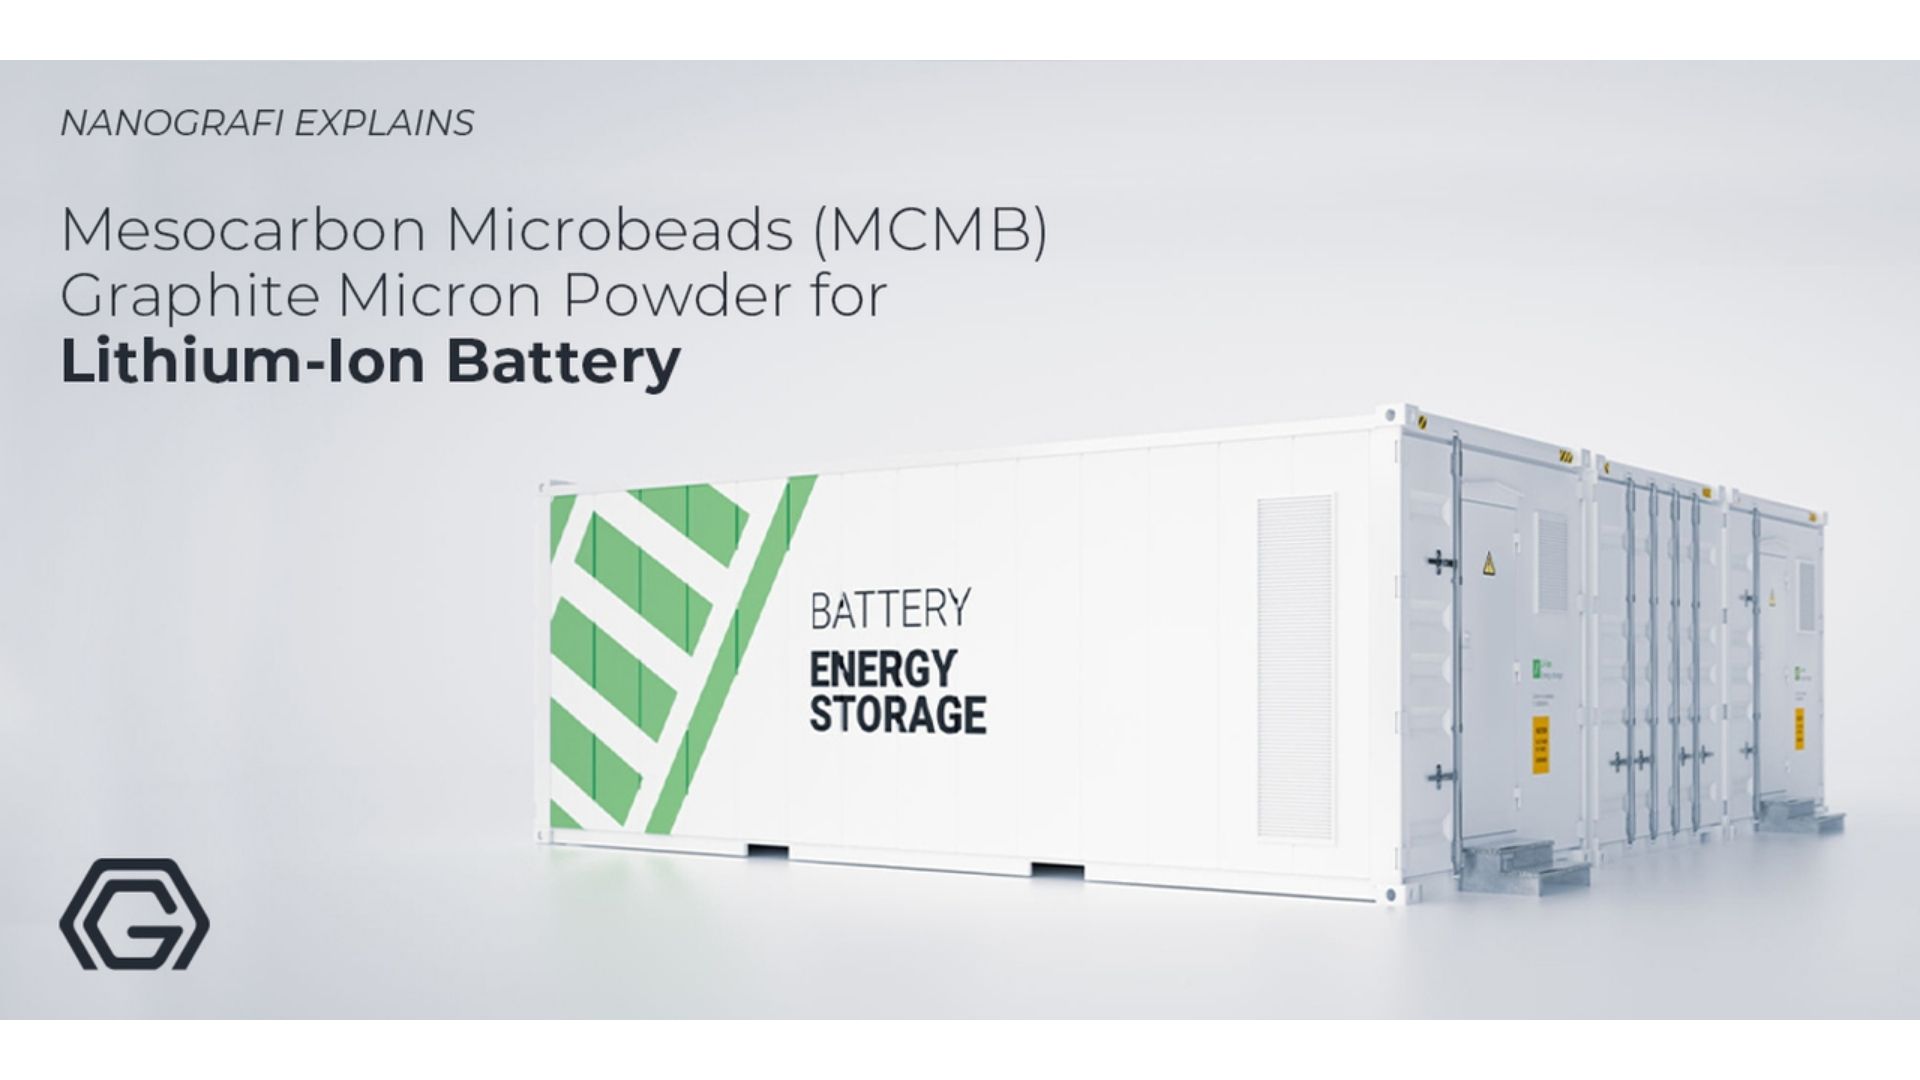 Discover MCMB Graphite Micron Powder for Li-Ion Battery